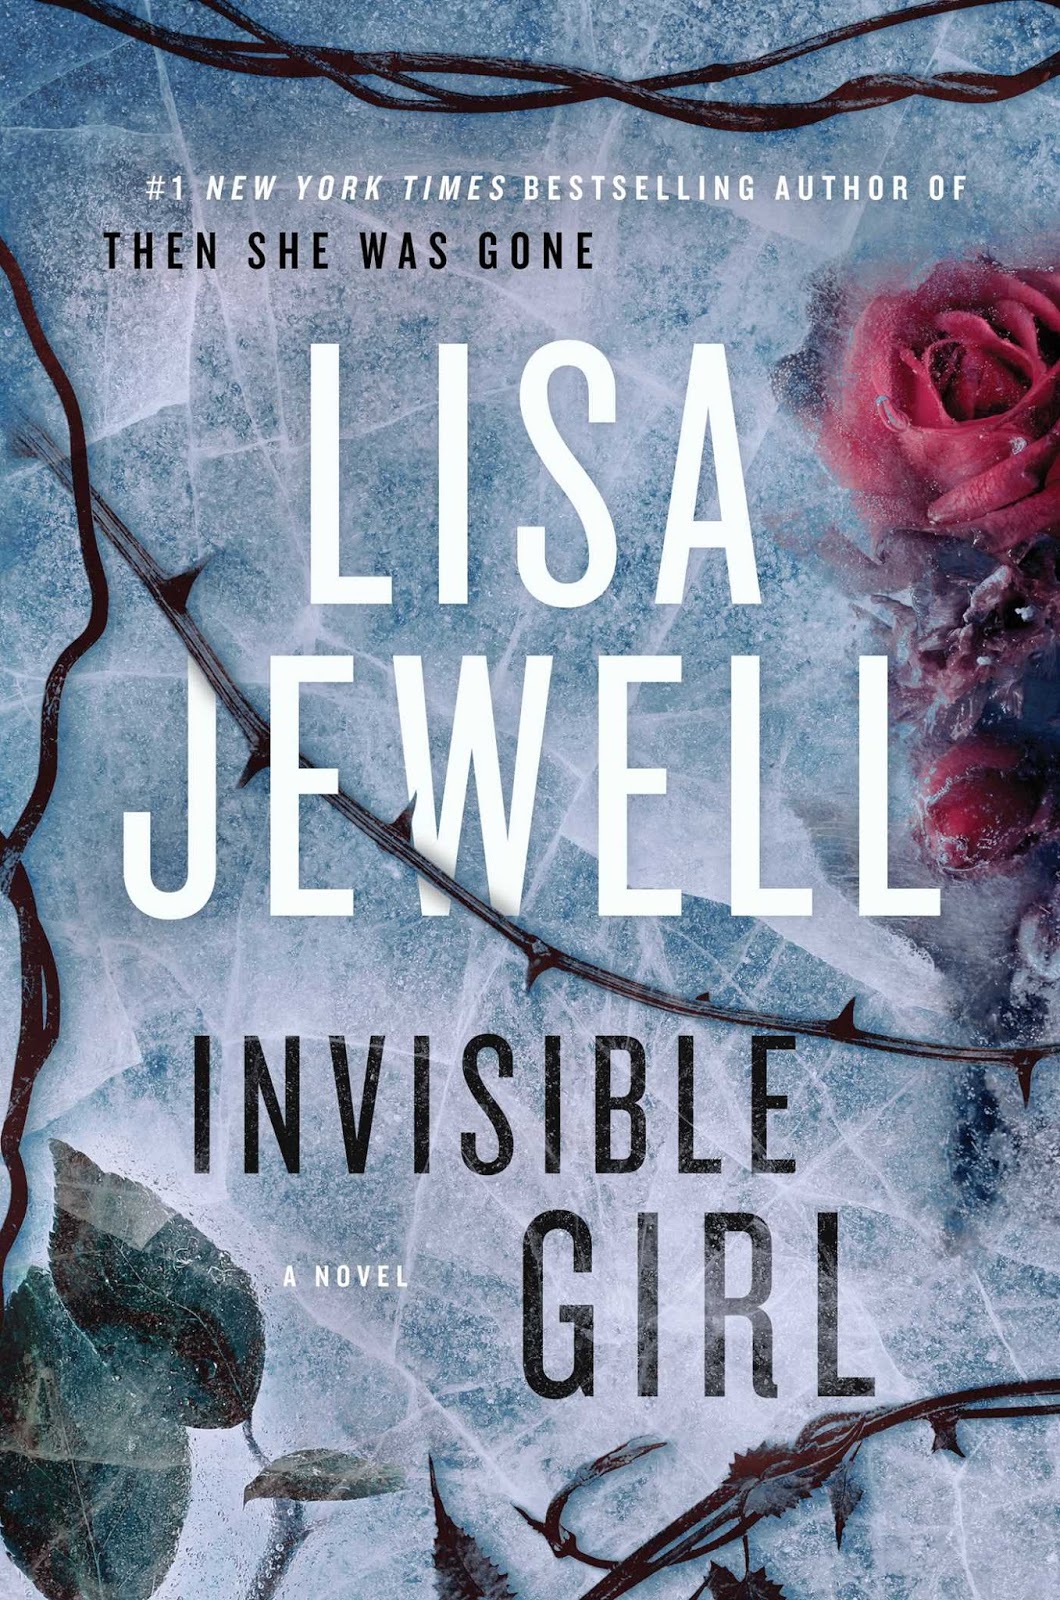 Review: Invisible Girl by Lisa Jewell